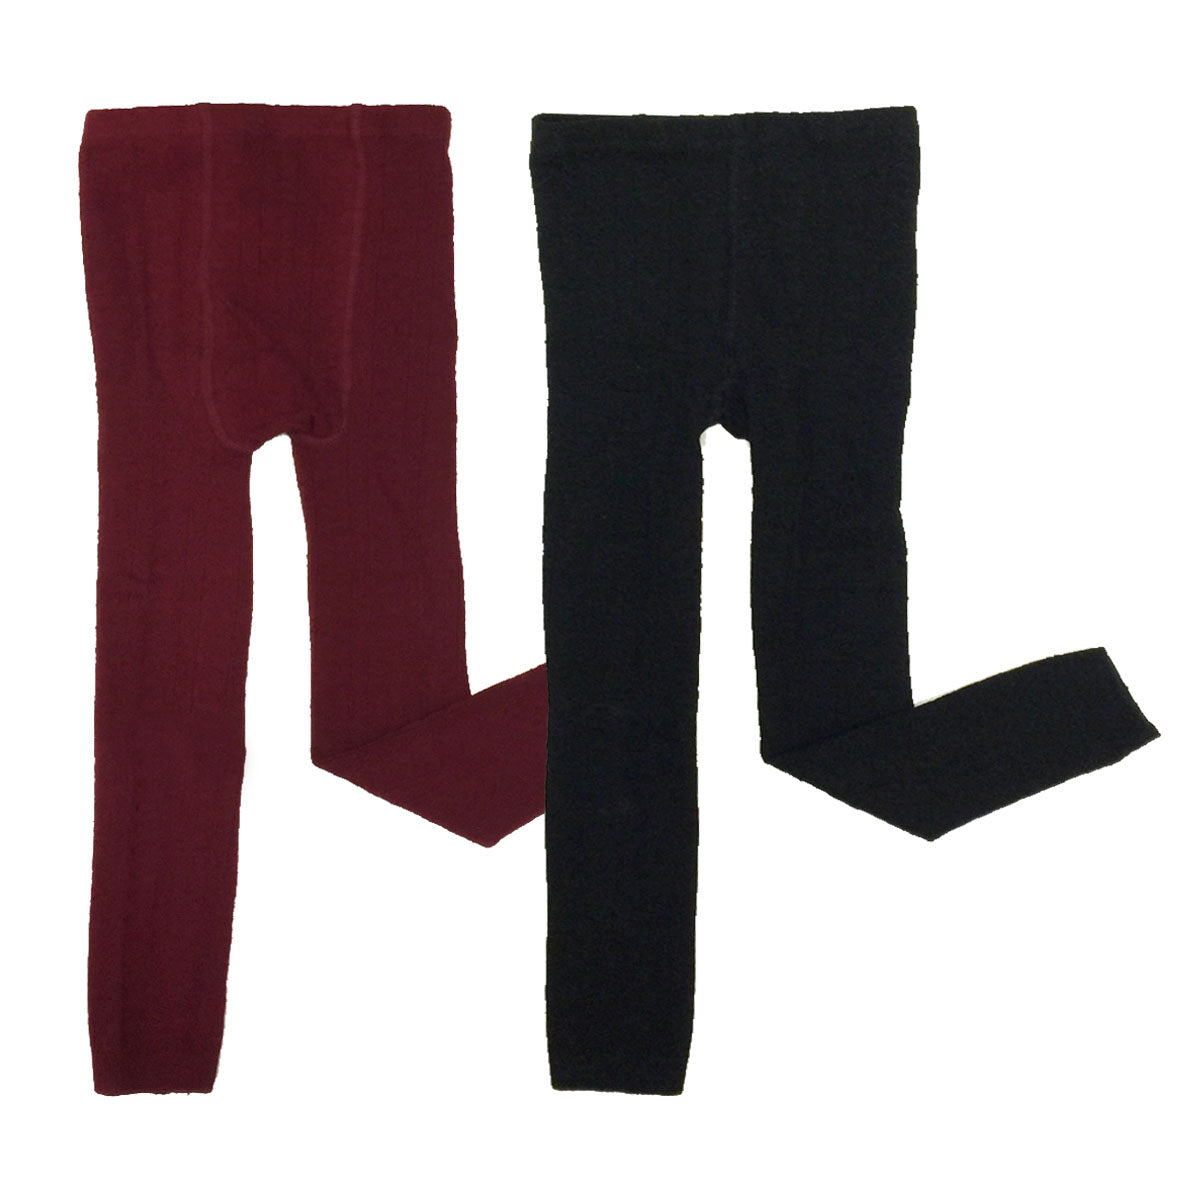 Wrapables Burgundy and Black Cotton Heart Knit Leggings for Toddlers (Set of 2)